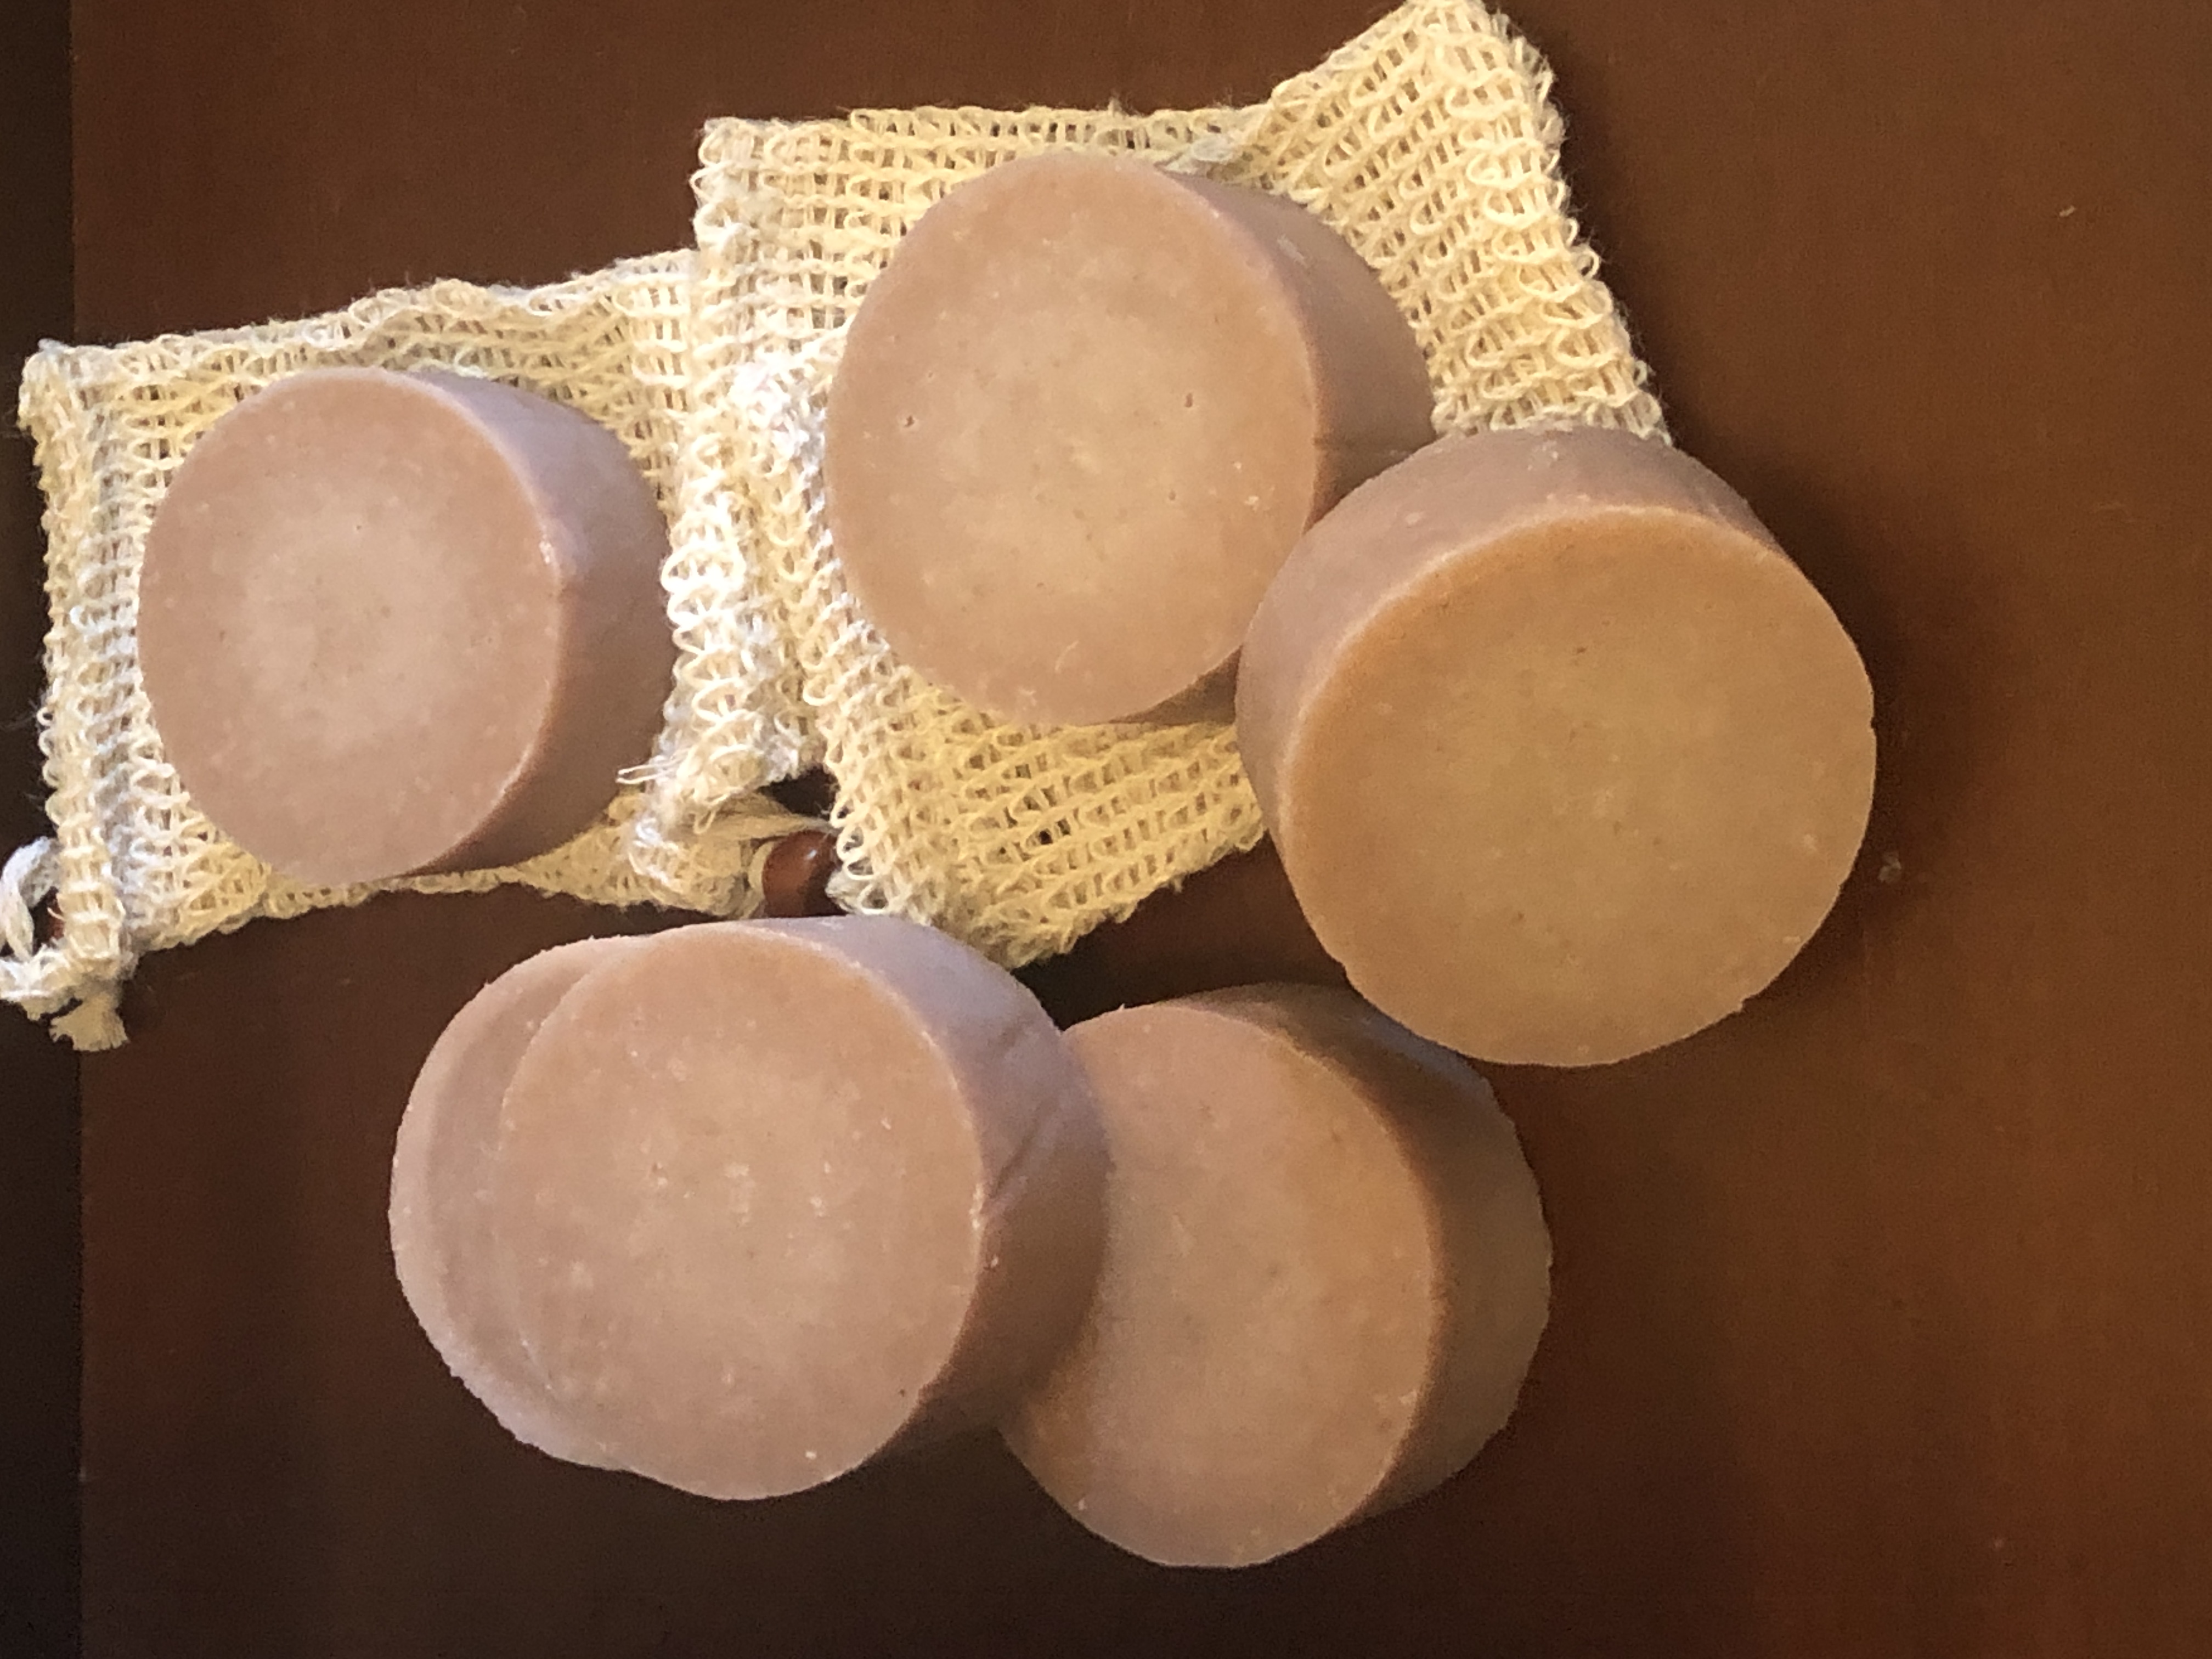 Creamy Aloe and Oat Soap – an unscented aloe vera cold processed soap that’s simple to make! A creamy and yet gentle soap for sensitive skin!